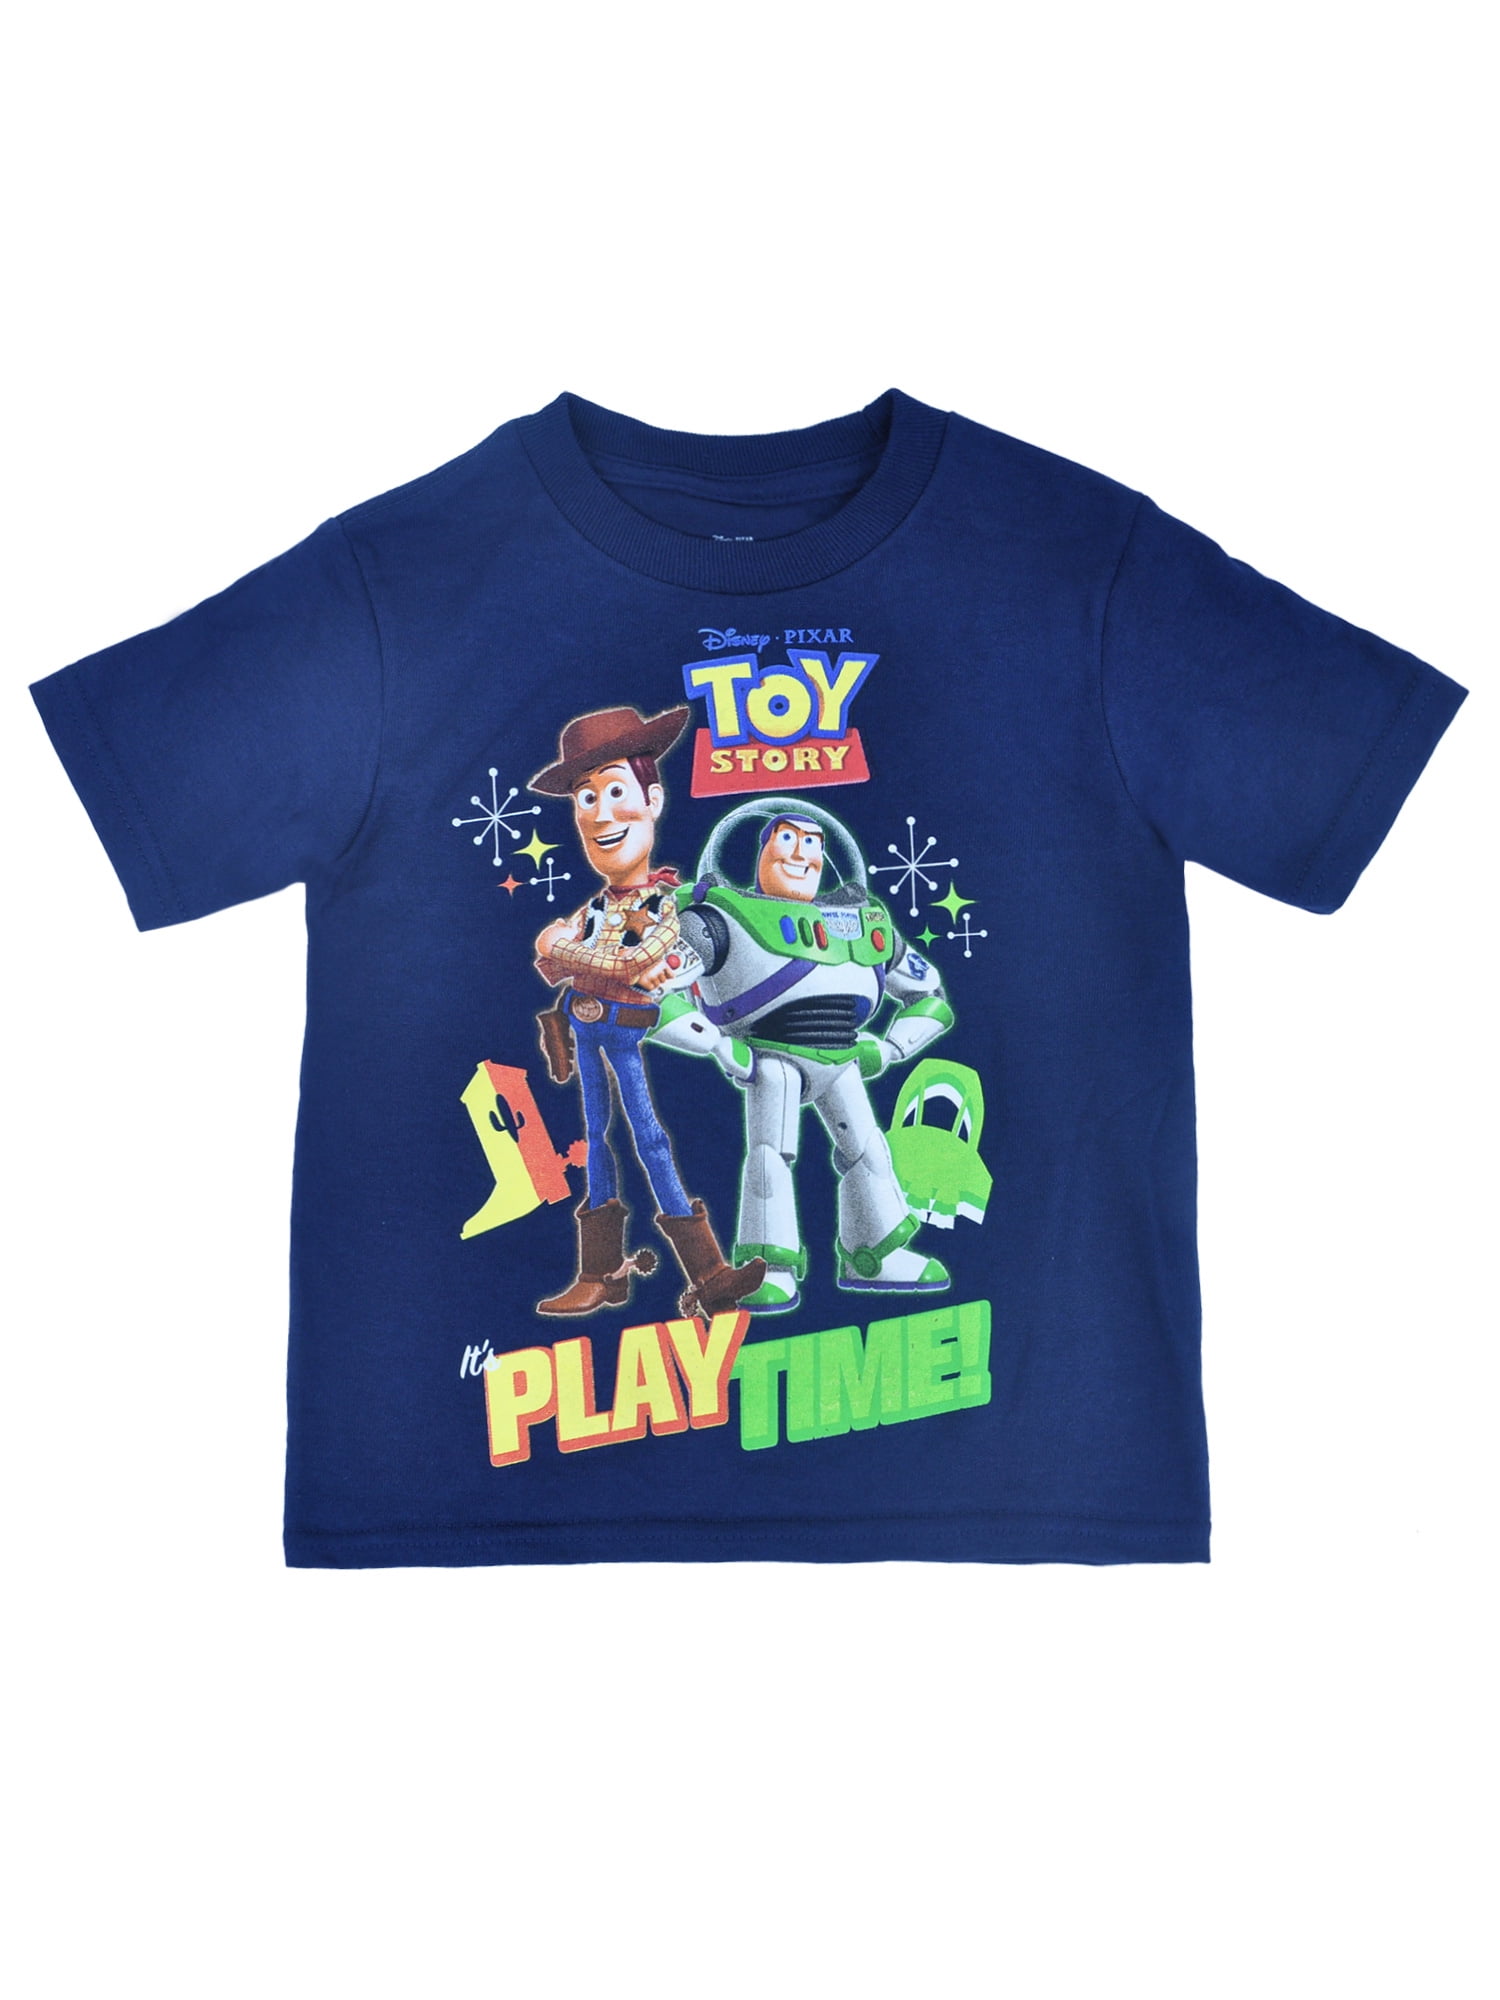 T-Shirt Official Toy Story Ages 3-8 White Boys Boxed 